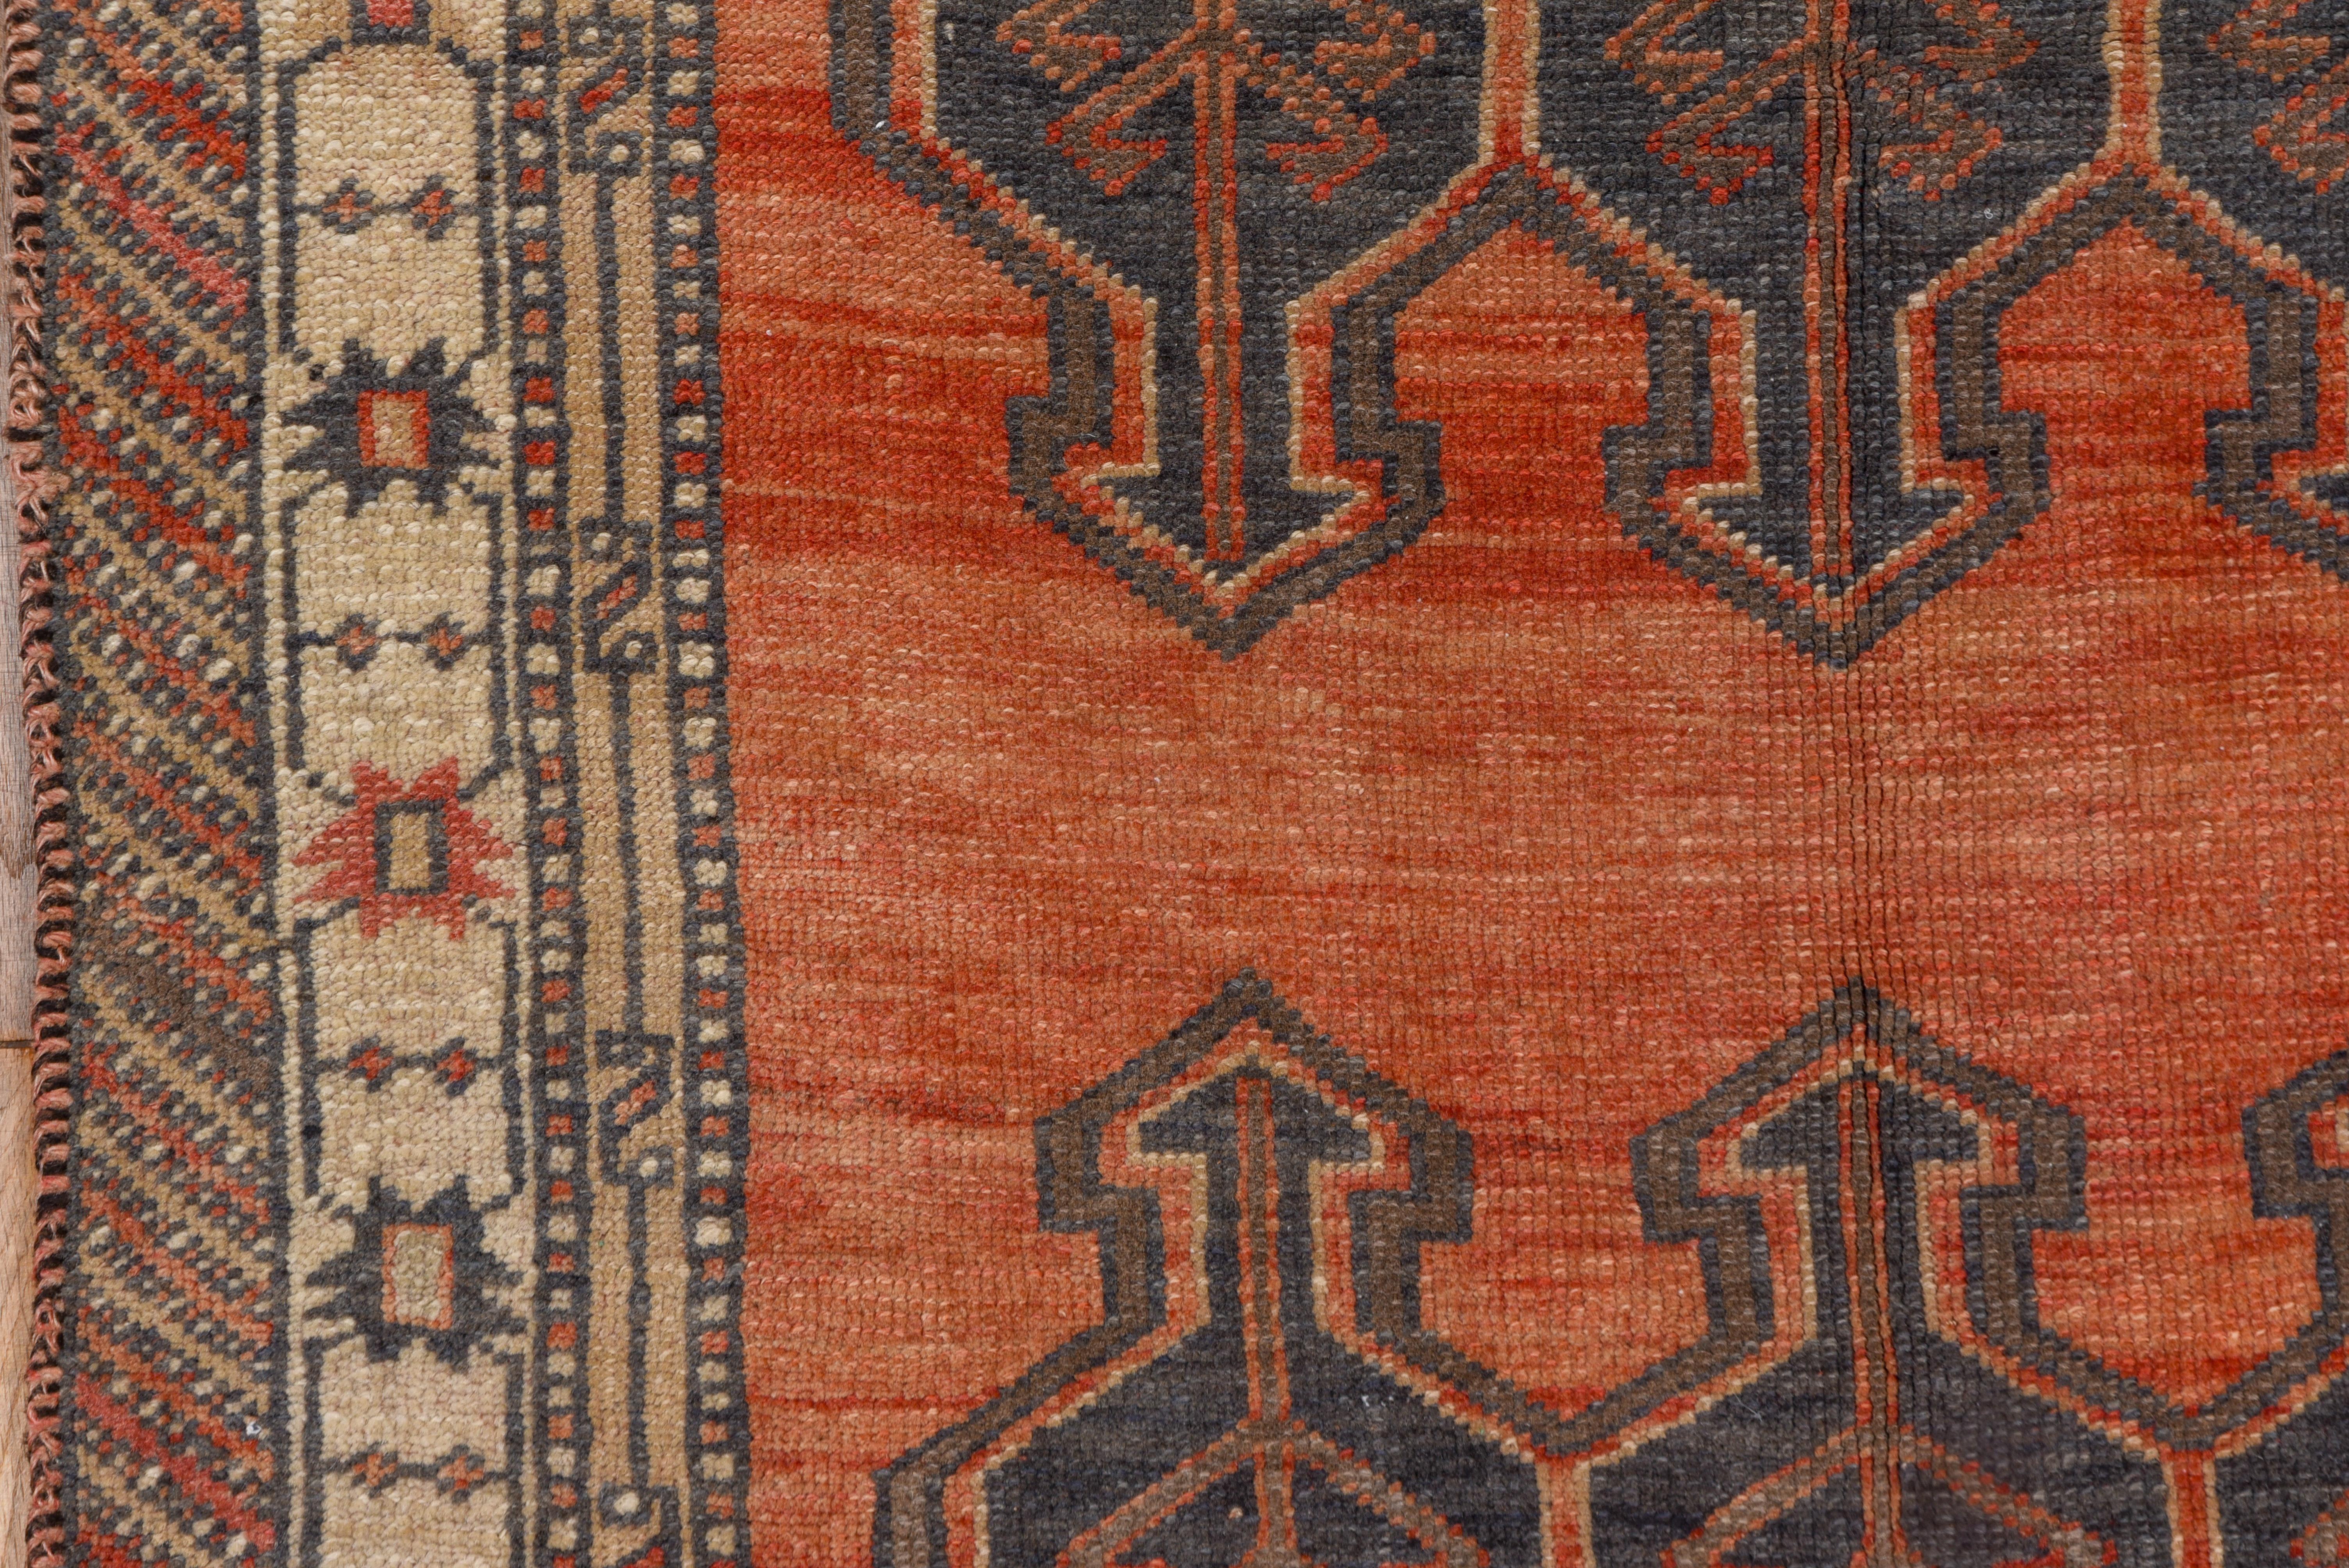 The well-abrashed soft red field of this oushak rug displays three rows each of three arrow-ended blue hexagons with interior herringbones. The ecru border shows widely separated stars.